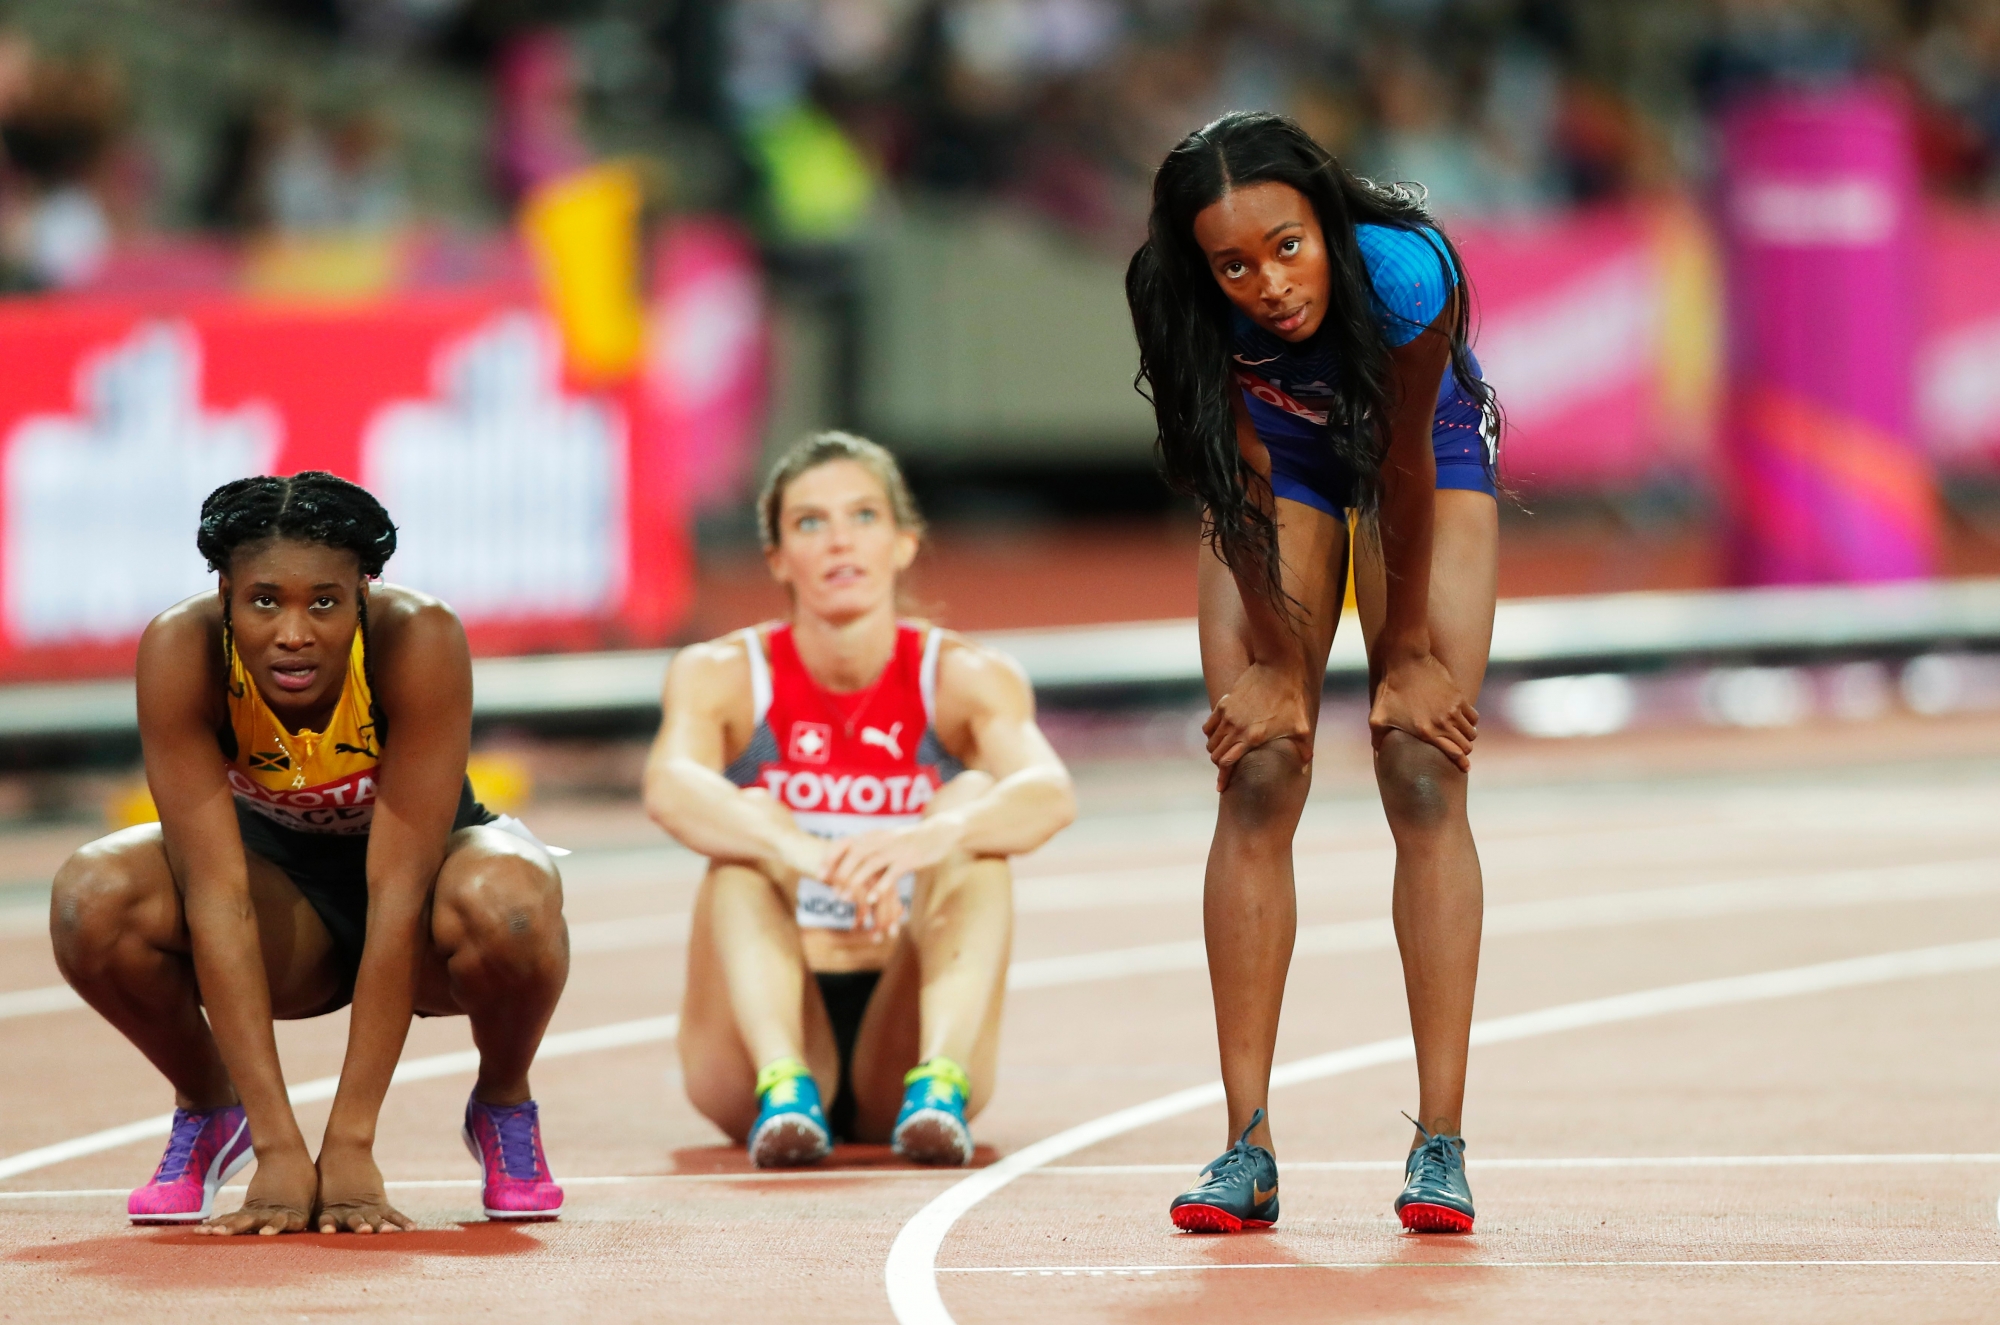 epa06136494 Dalilah Muhammad (R) of the USA, Ristananna Tracey (L) of Jamaica and  

Lea Sprunger of Switzertland look at the scoreboard after the women's 400m Hurdles final at the London 2017 IAAF World Championships in London, Britain, 10 August 2017. Muhammad placed second, Tracey third.  EPA/IAN LANGSDON BRITAIN  IAAF ATHLETICS WORLD CHAMPIONSHIPS LONDON 2017